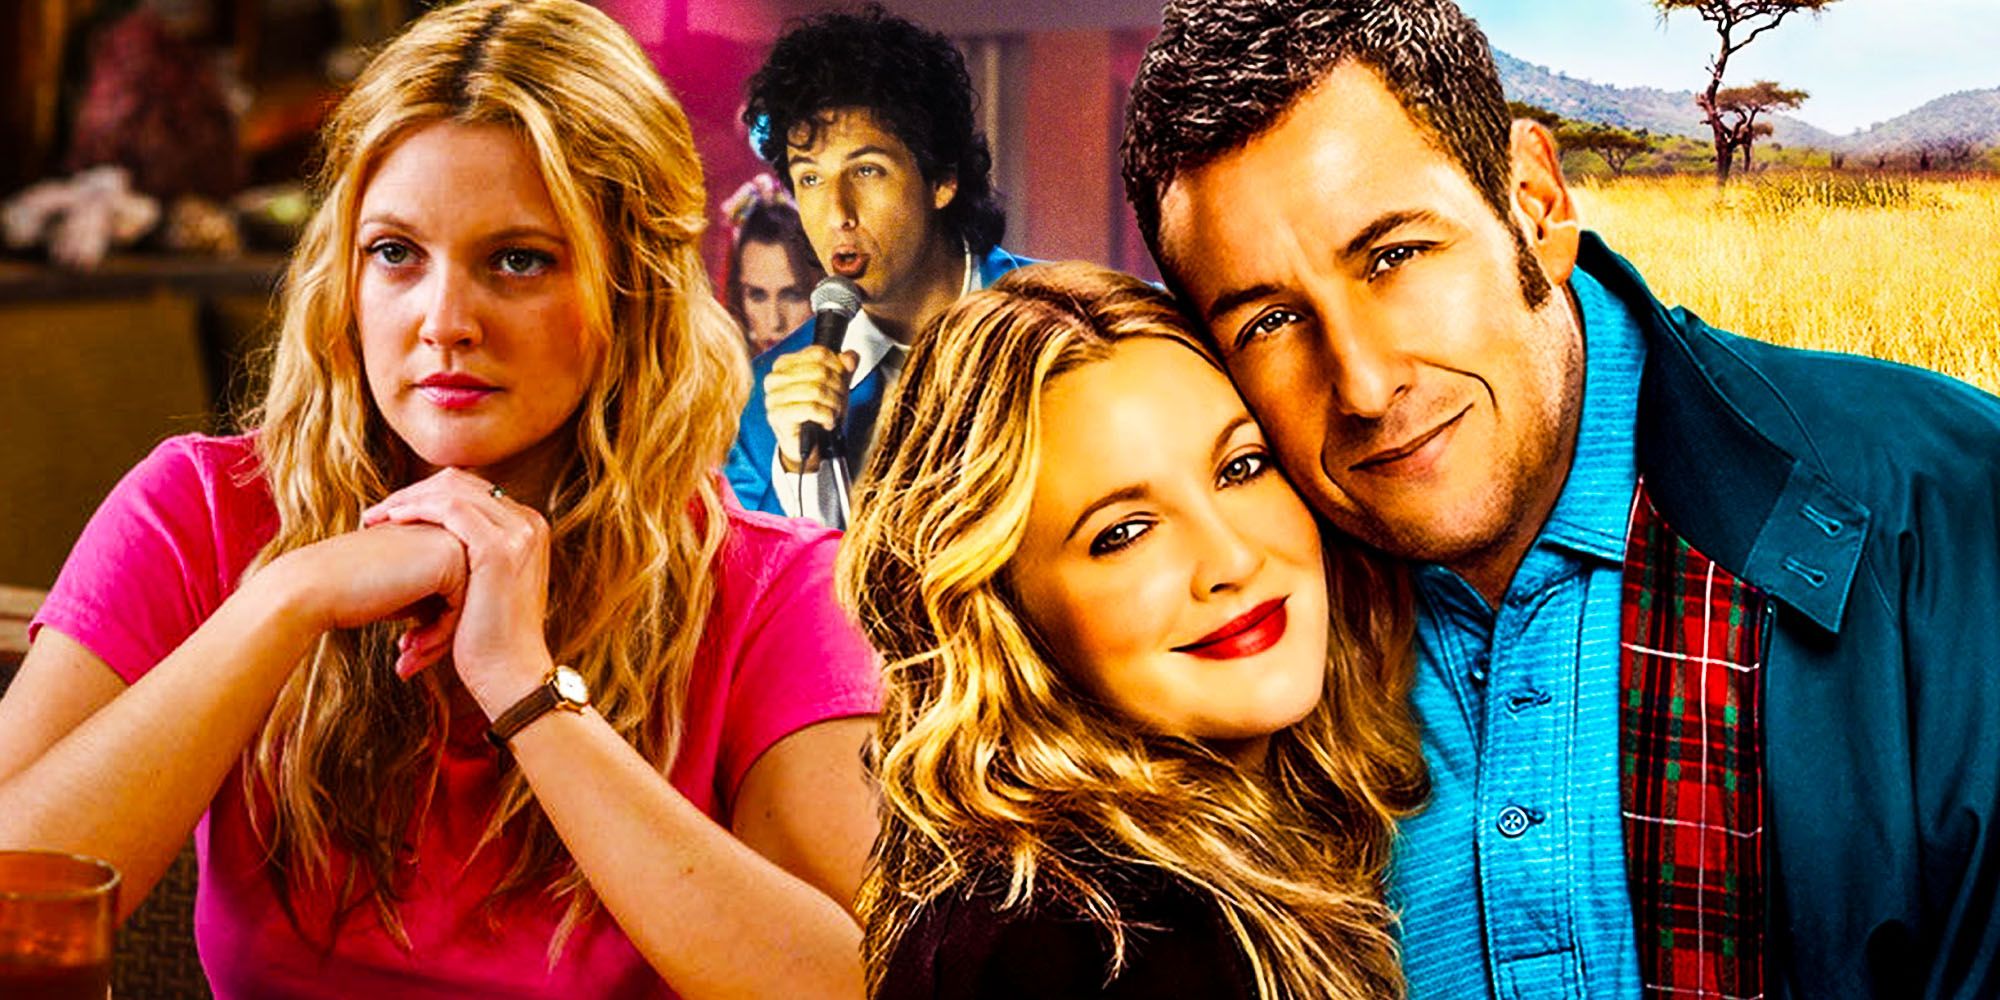 21 how many movies have adam sandler and drew barrymore been in together Ultimate Guide